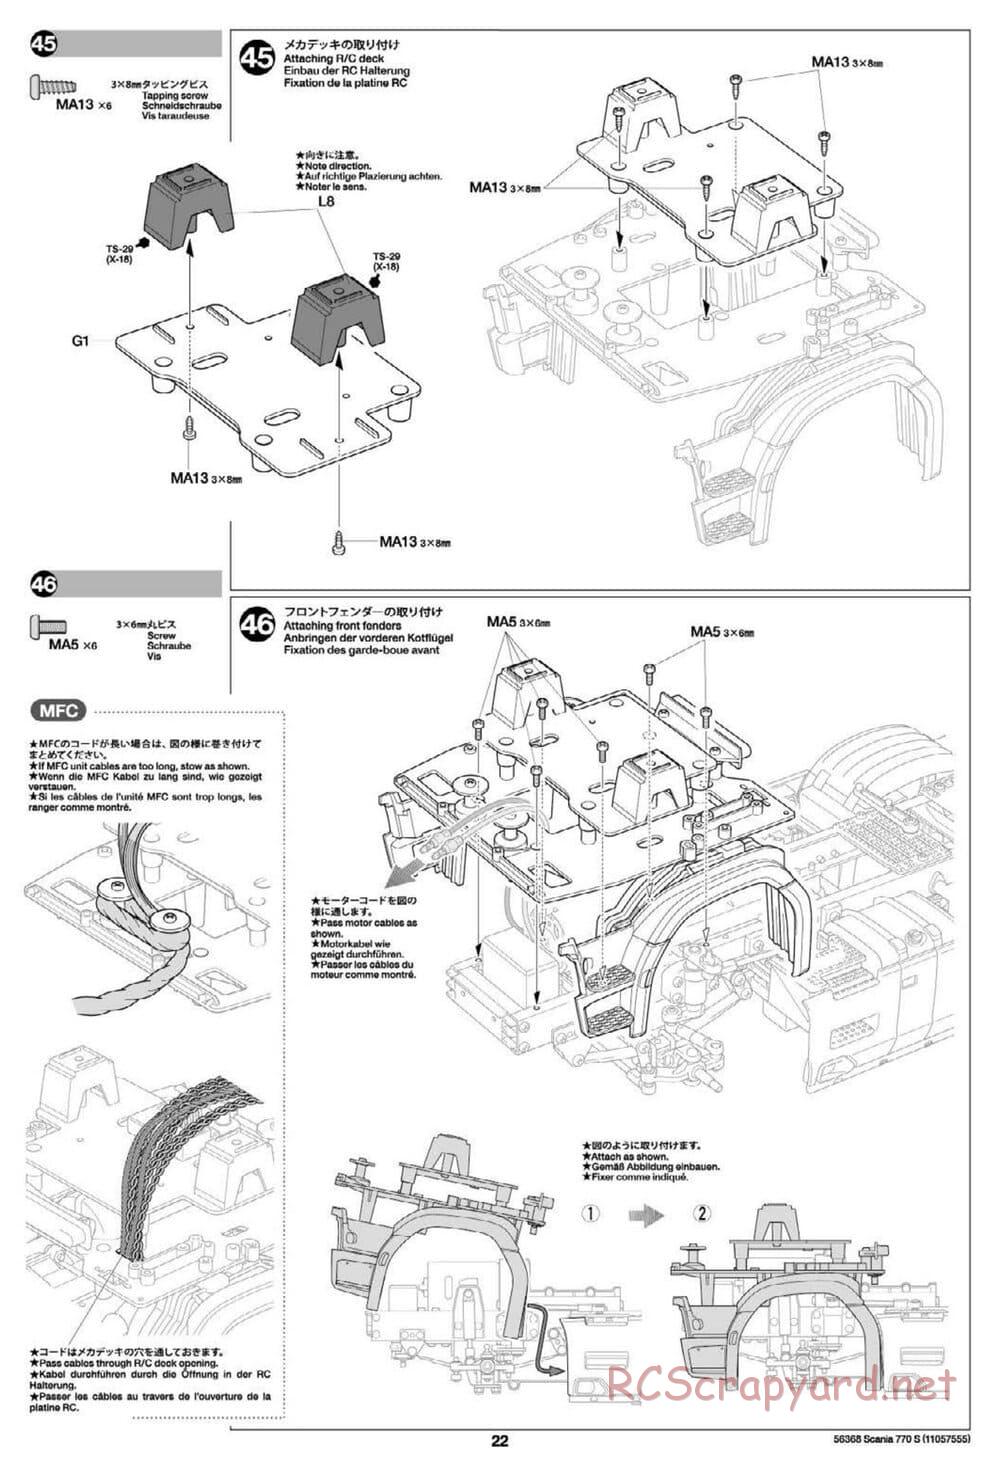 Tamiya - Scania 770S 6x4 Tractor Truck Chassis - Manual - Page 22